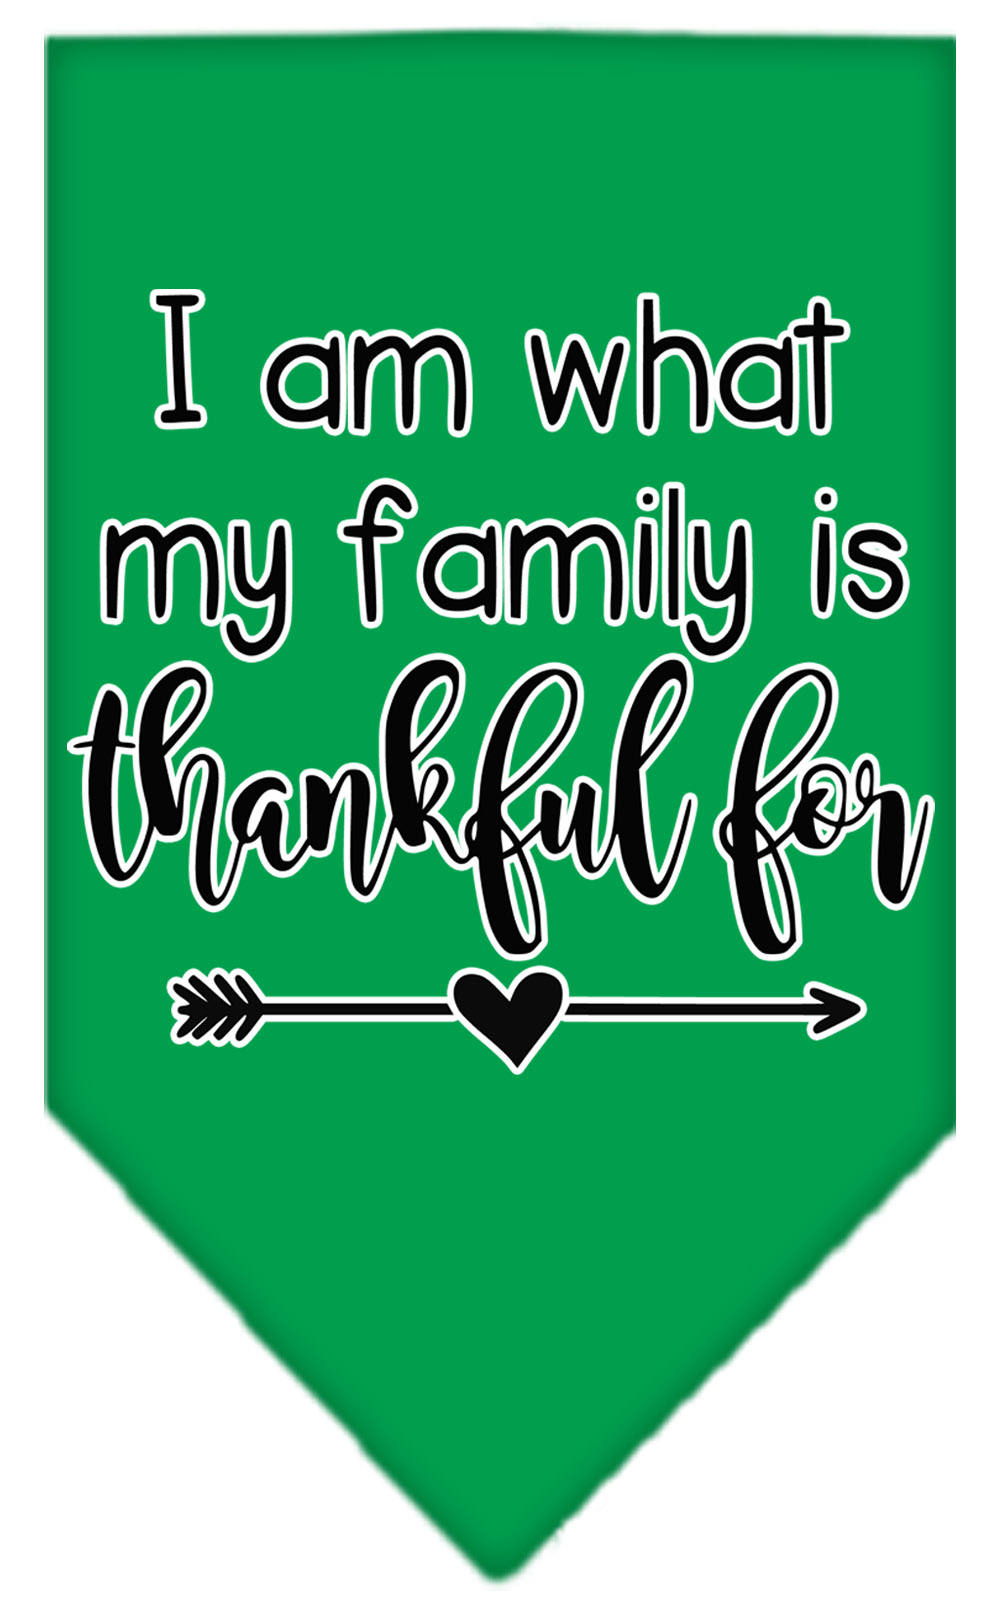 I Am What My Family is Thankful For Screen Print Bandana Emerald Green Large